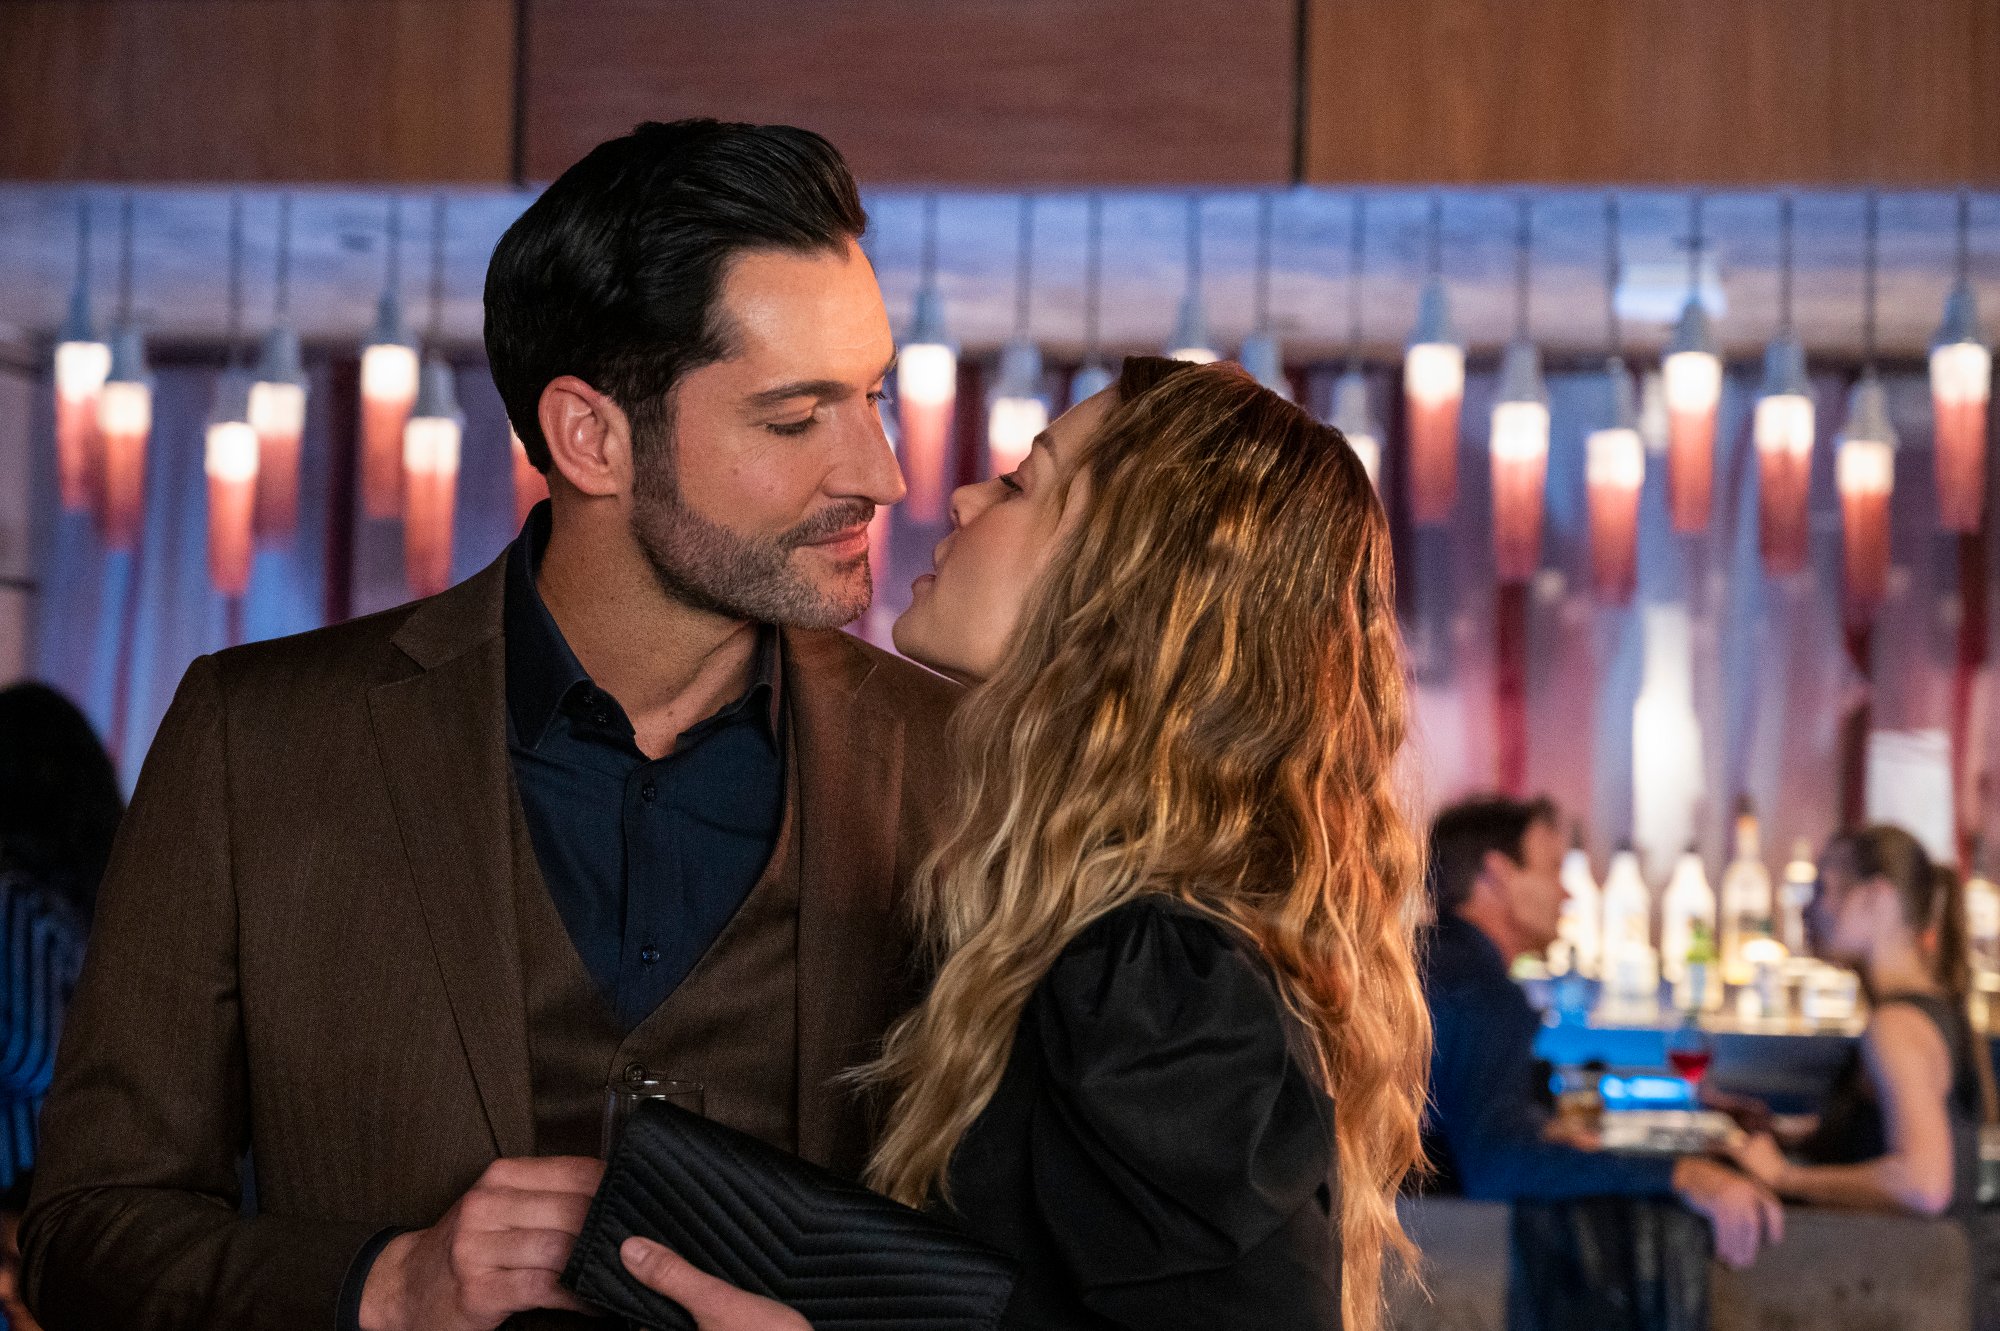 Tom Ellis and Lauren German as Lucifer Morningstar and Chloe Decker in 1 of the 16 episodes in 'Lucifer' Season 5. They're looking at one another and smiling.